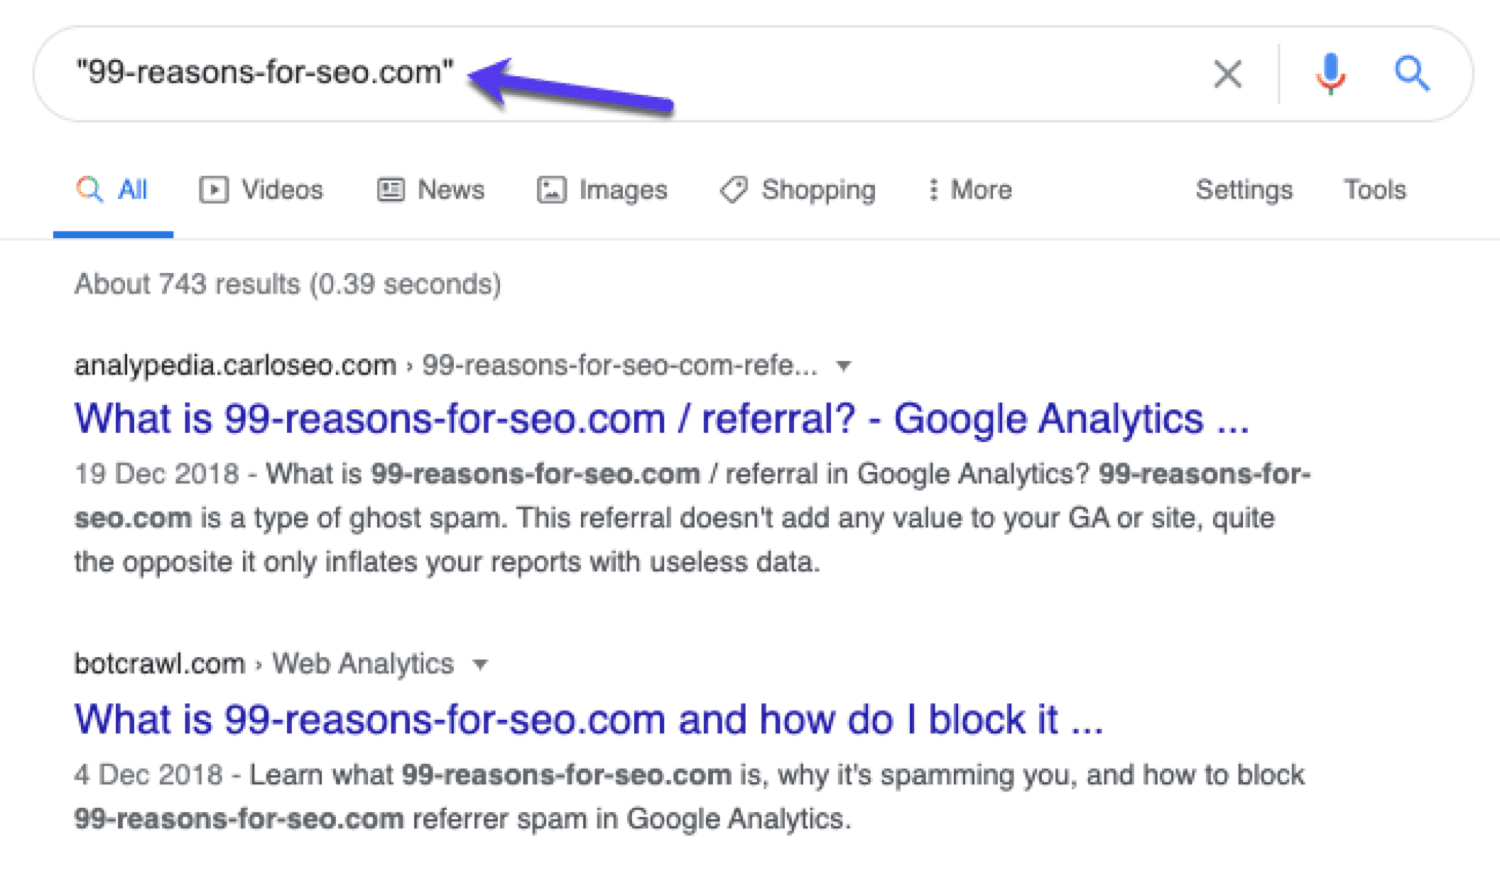 Search for spam referrer sites in Google to see if others sites have flagged them before